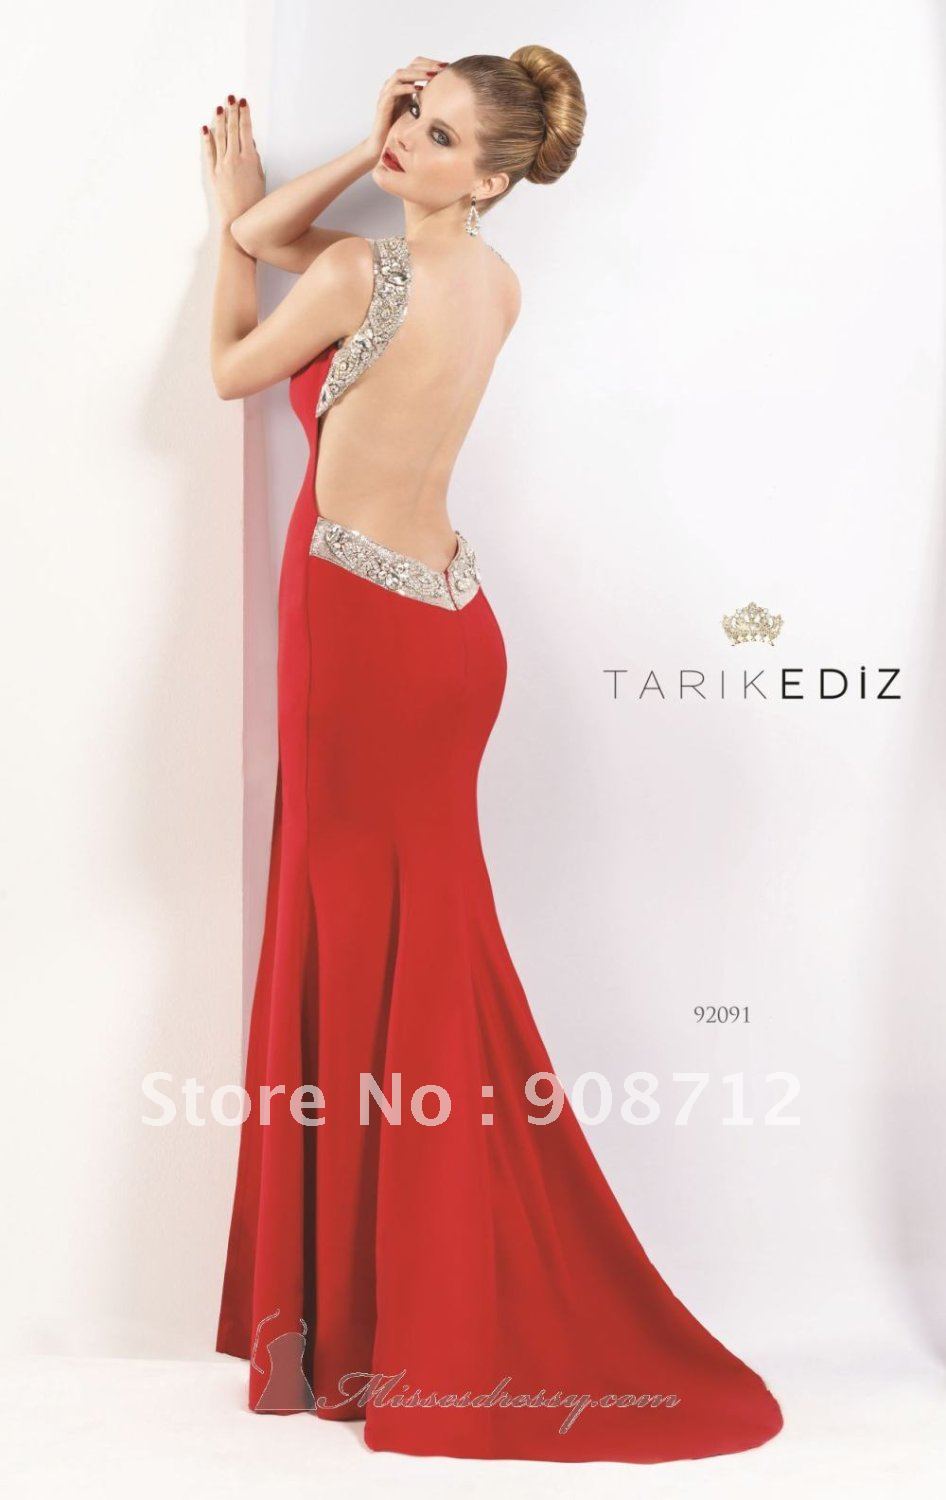 Top Selling ! Mermaid Sleeveless V-neck Satin Sexy Evening Dress 2012 , Party Dress with Beaded Embelishments and Open Back